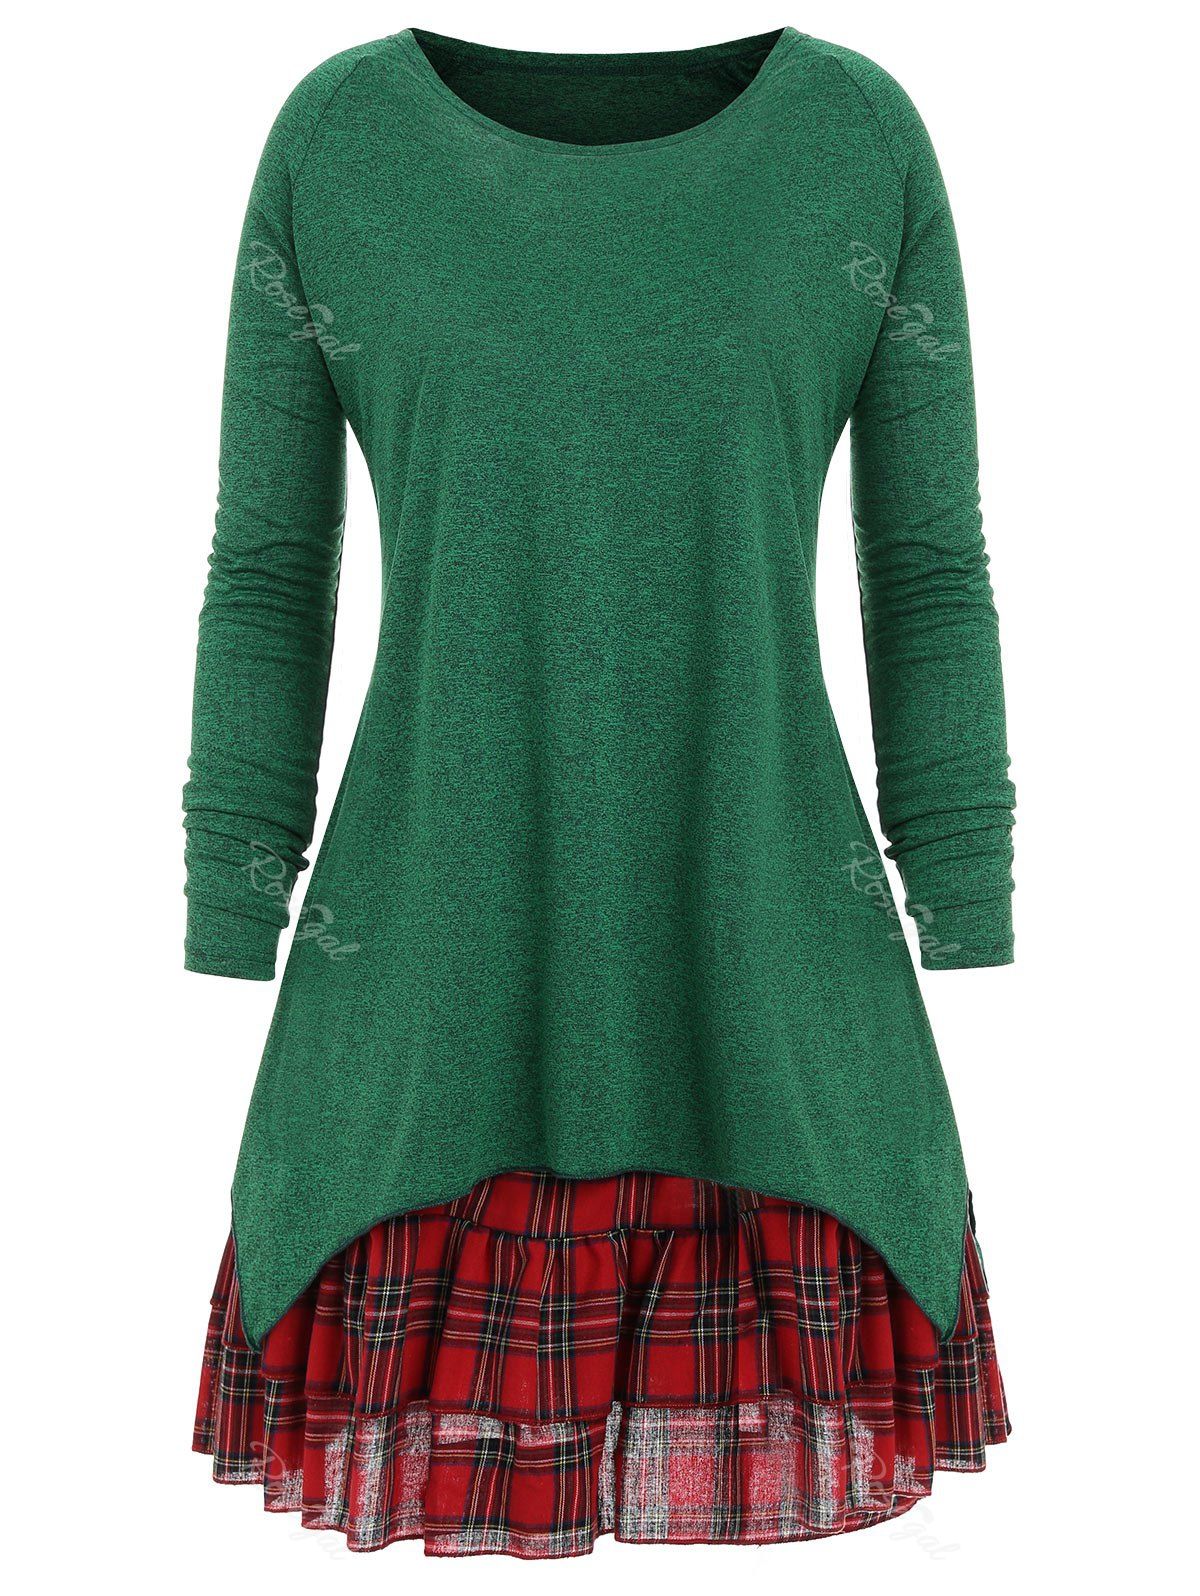 2018 Plus Size Plaid Two Piece Dress In Green Xl | Rosegal.com